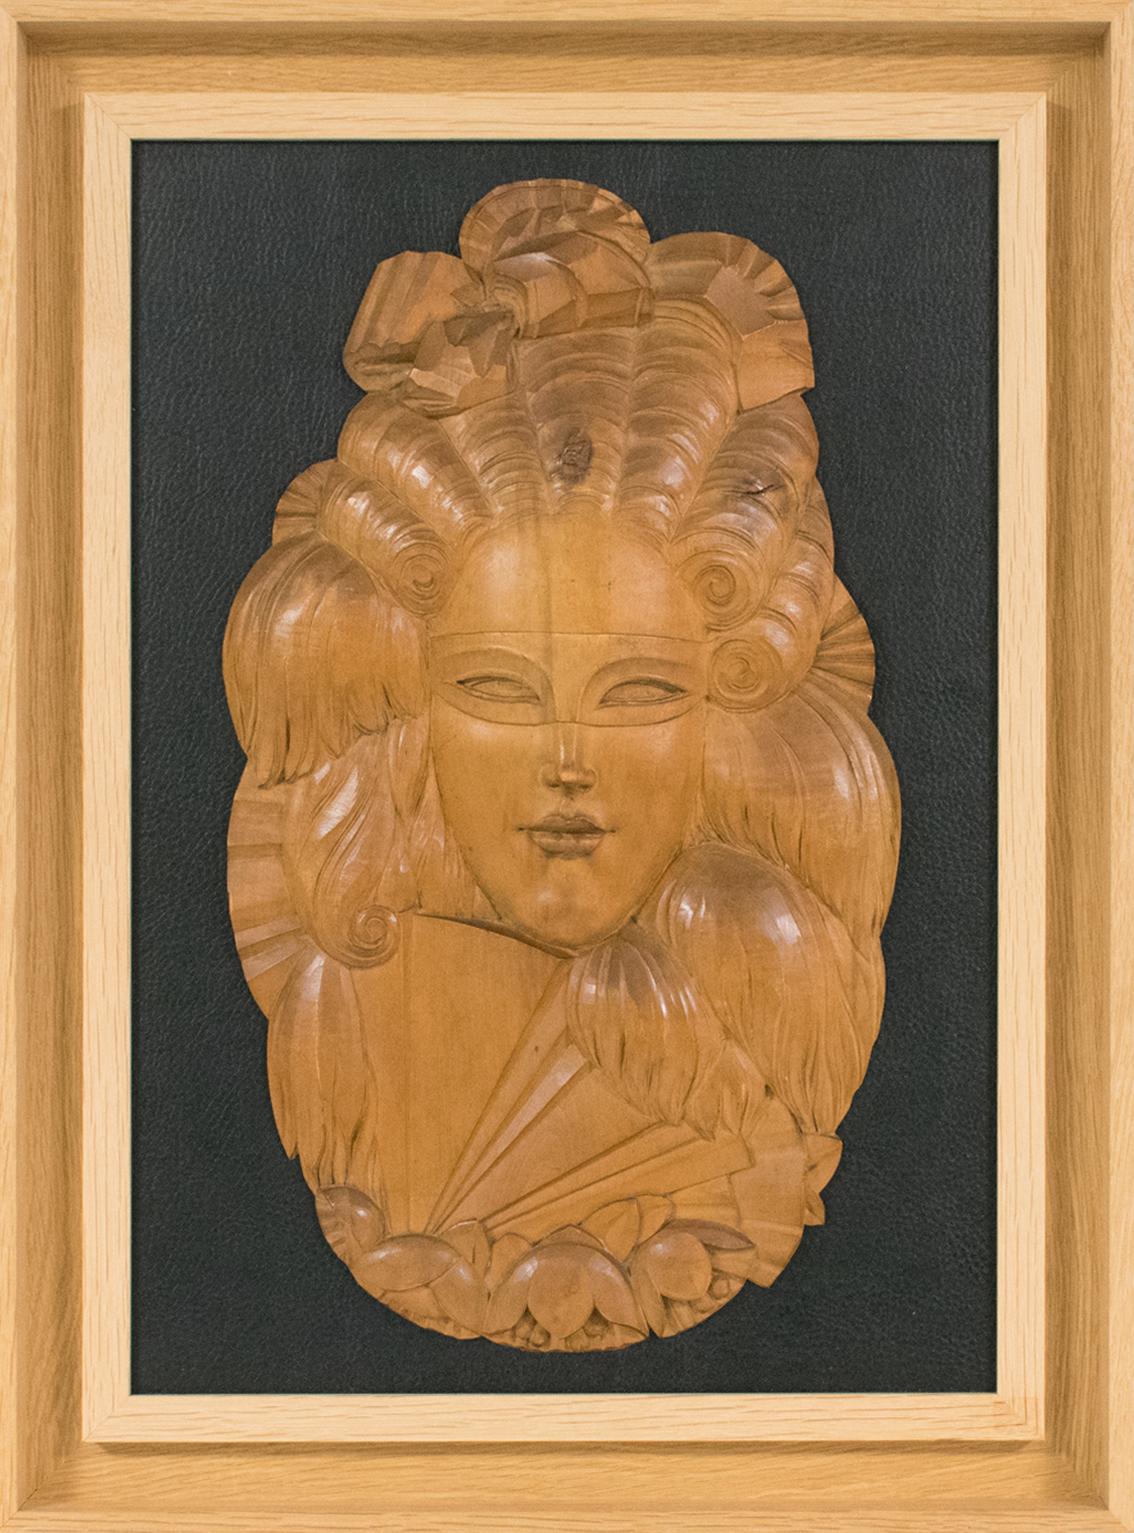 Art Deco Venetian Mask Handcarved Wood Panel Wall Sculpture - Mixed Media Art by Unknown